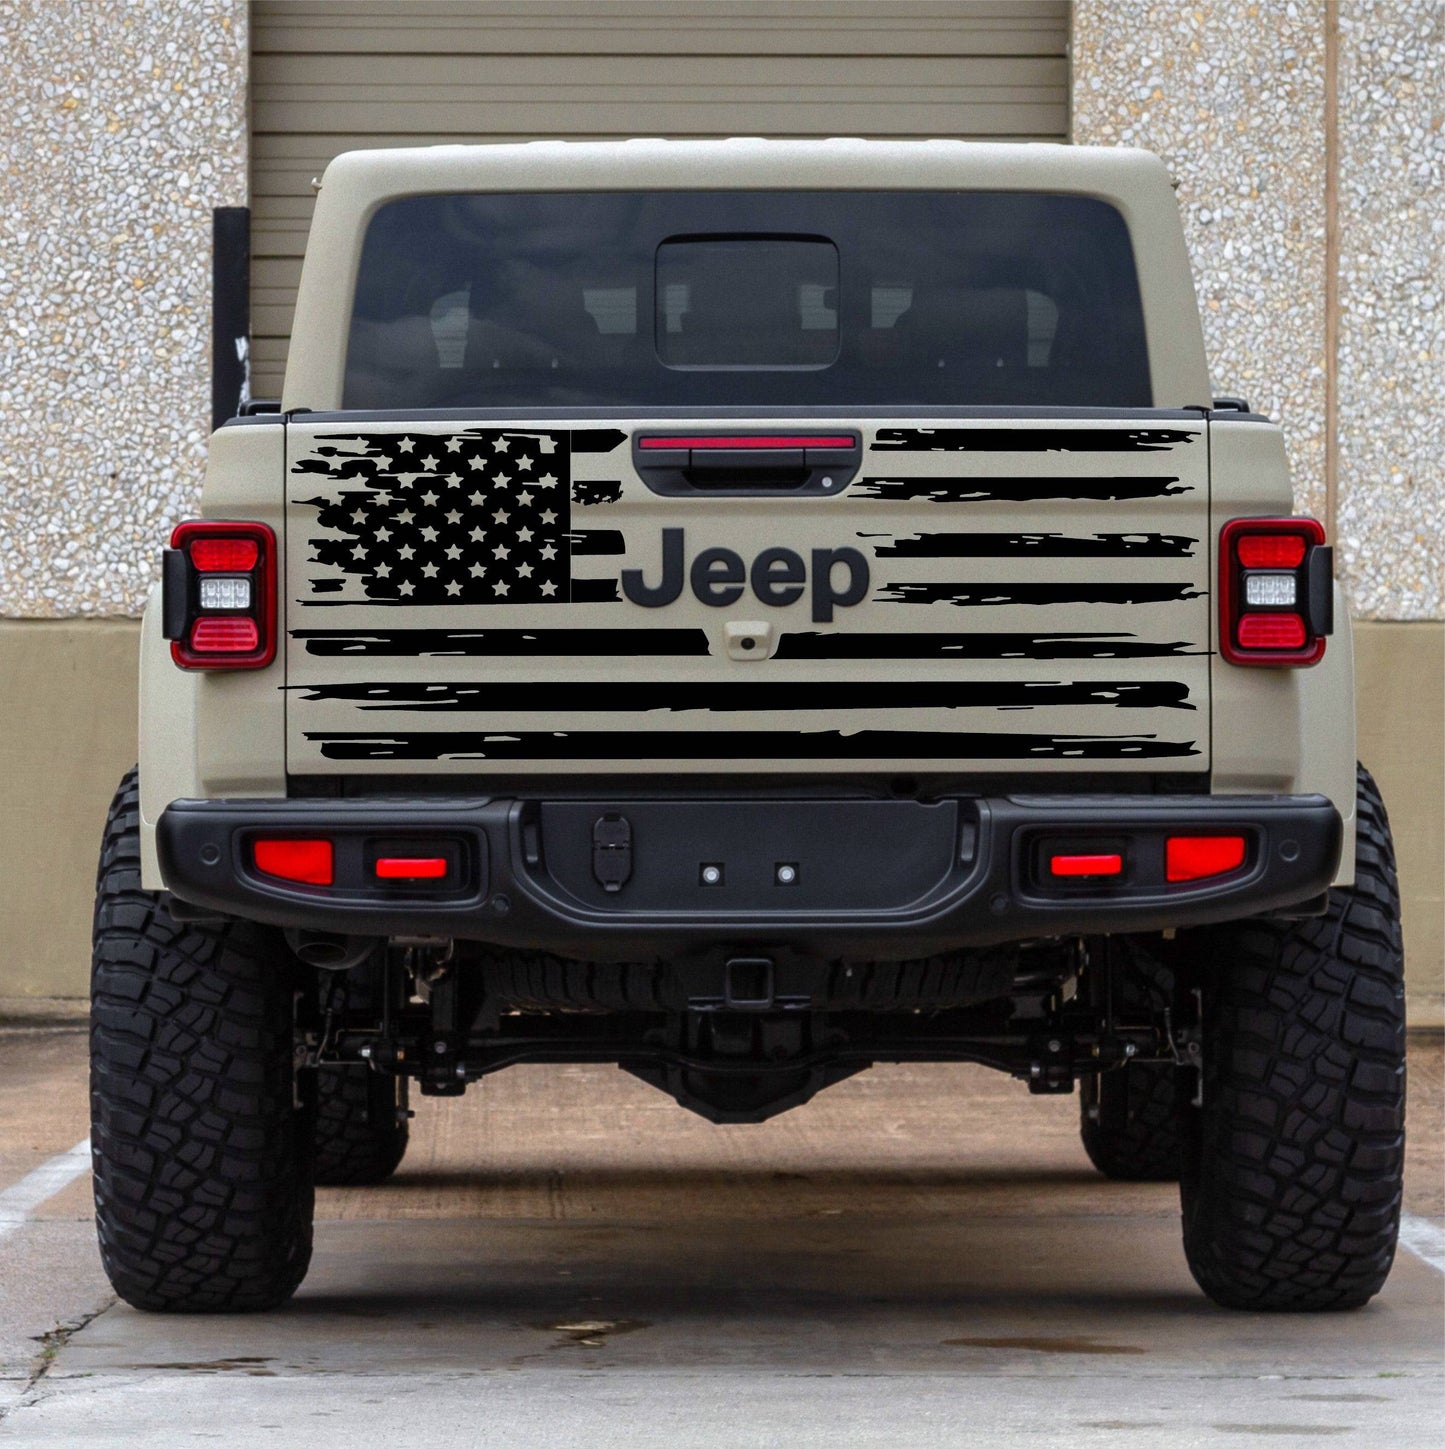 Distressed American Flag Vinyl Decal for Jeep Gladiator Tailgate